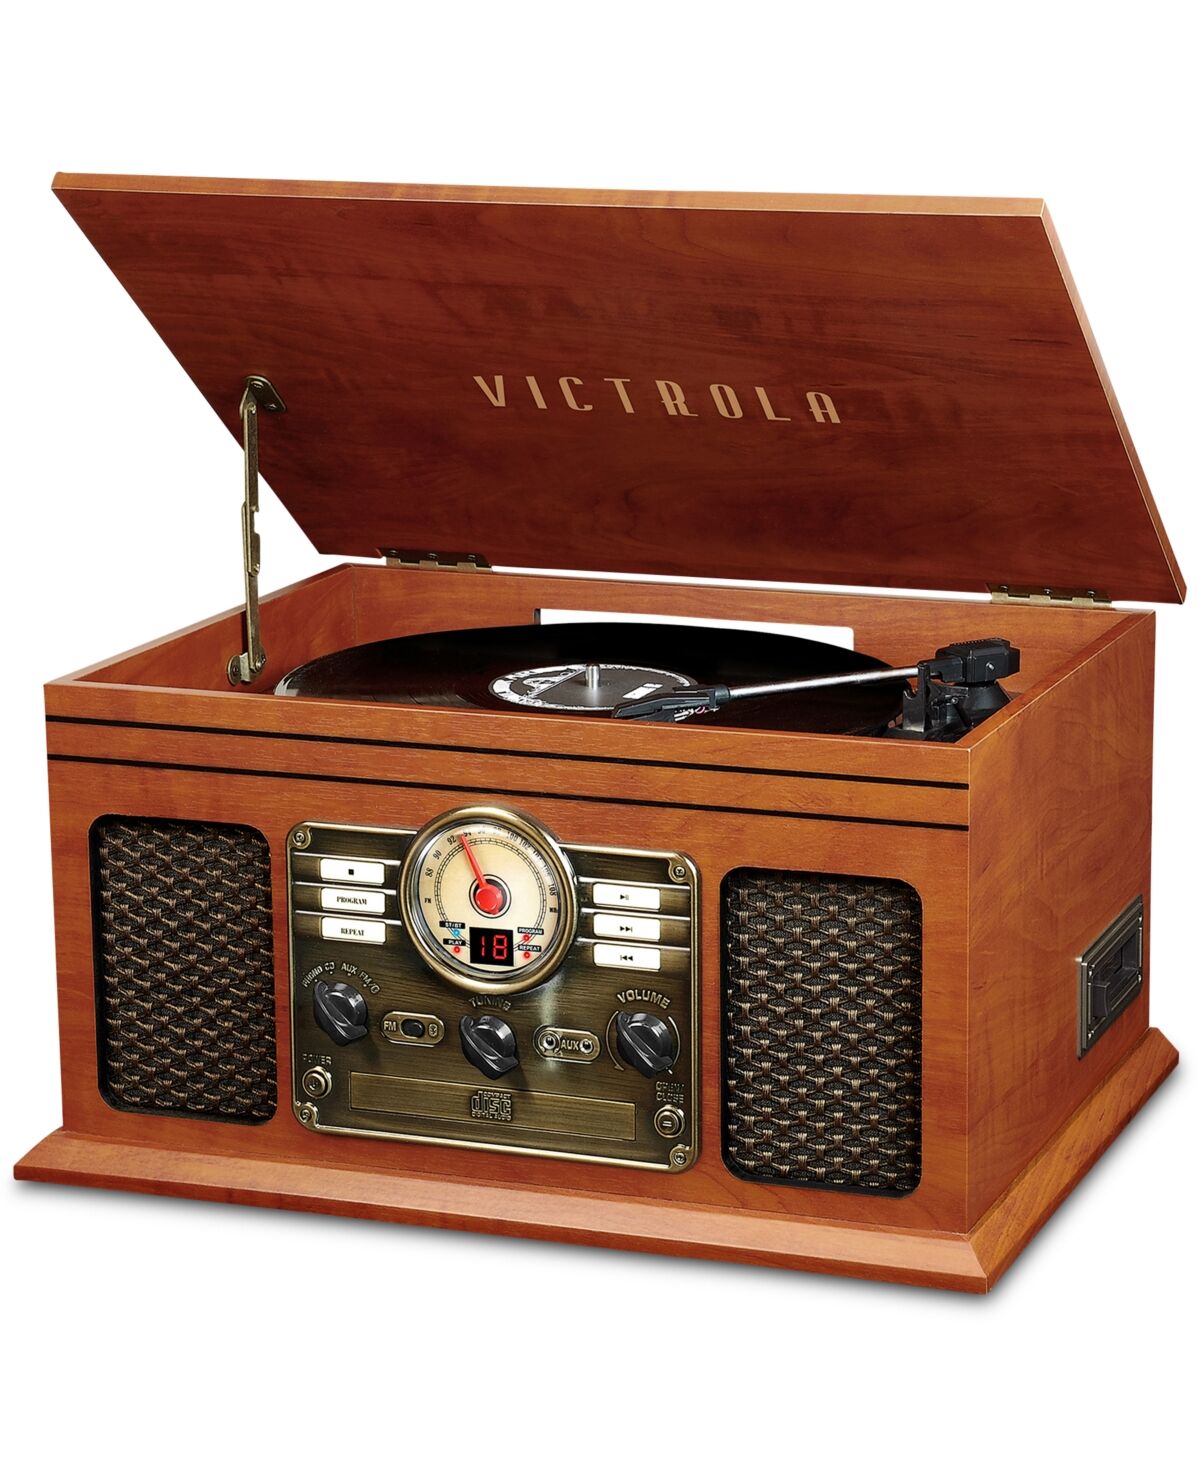 Innovative Technology Victrola 6-In-1 Nostalgic Bluetooth Record Player With 3-Speed Turntable - Mahogany